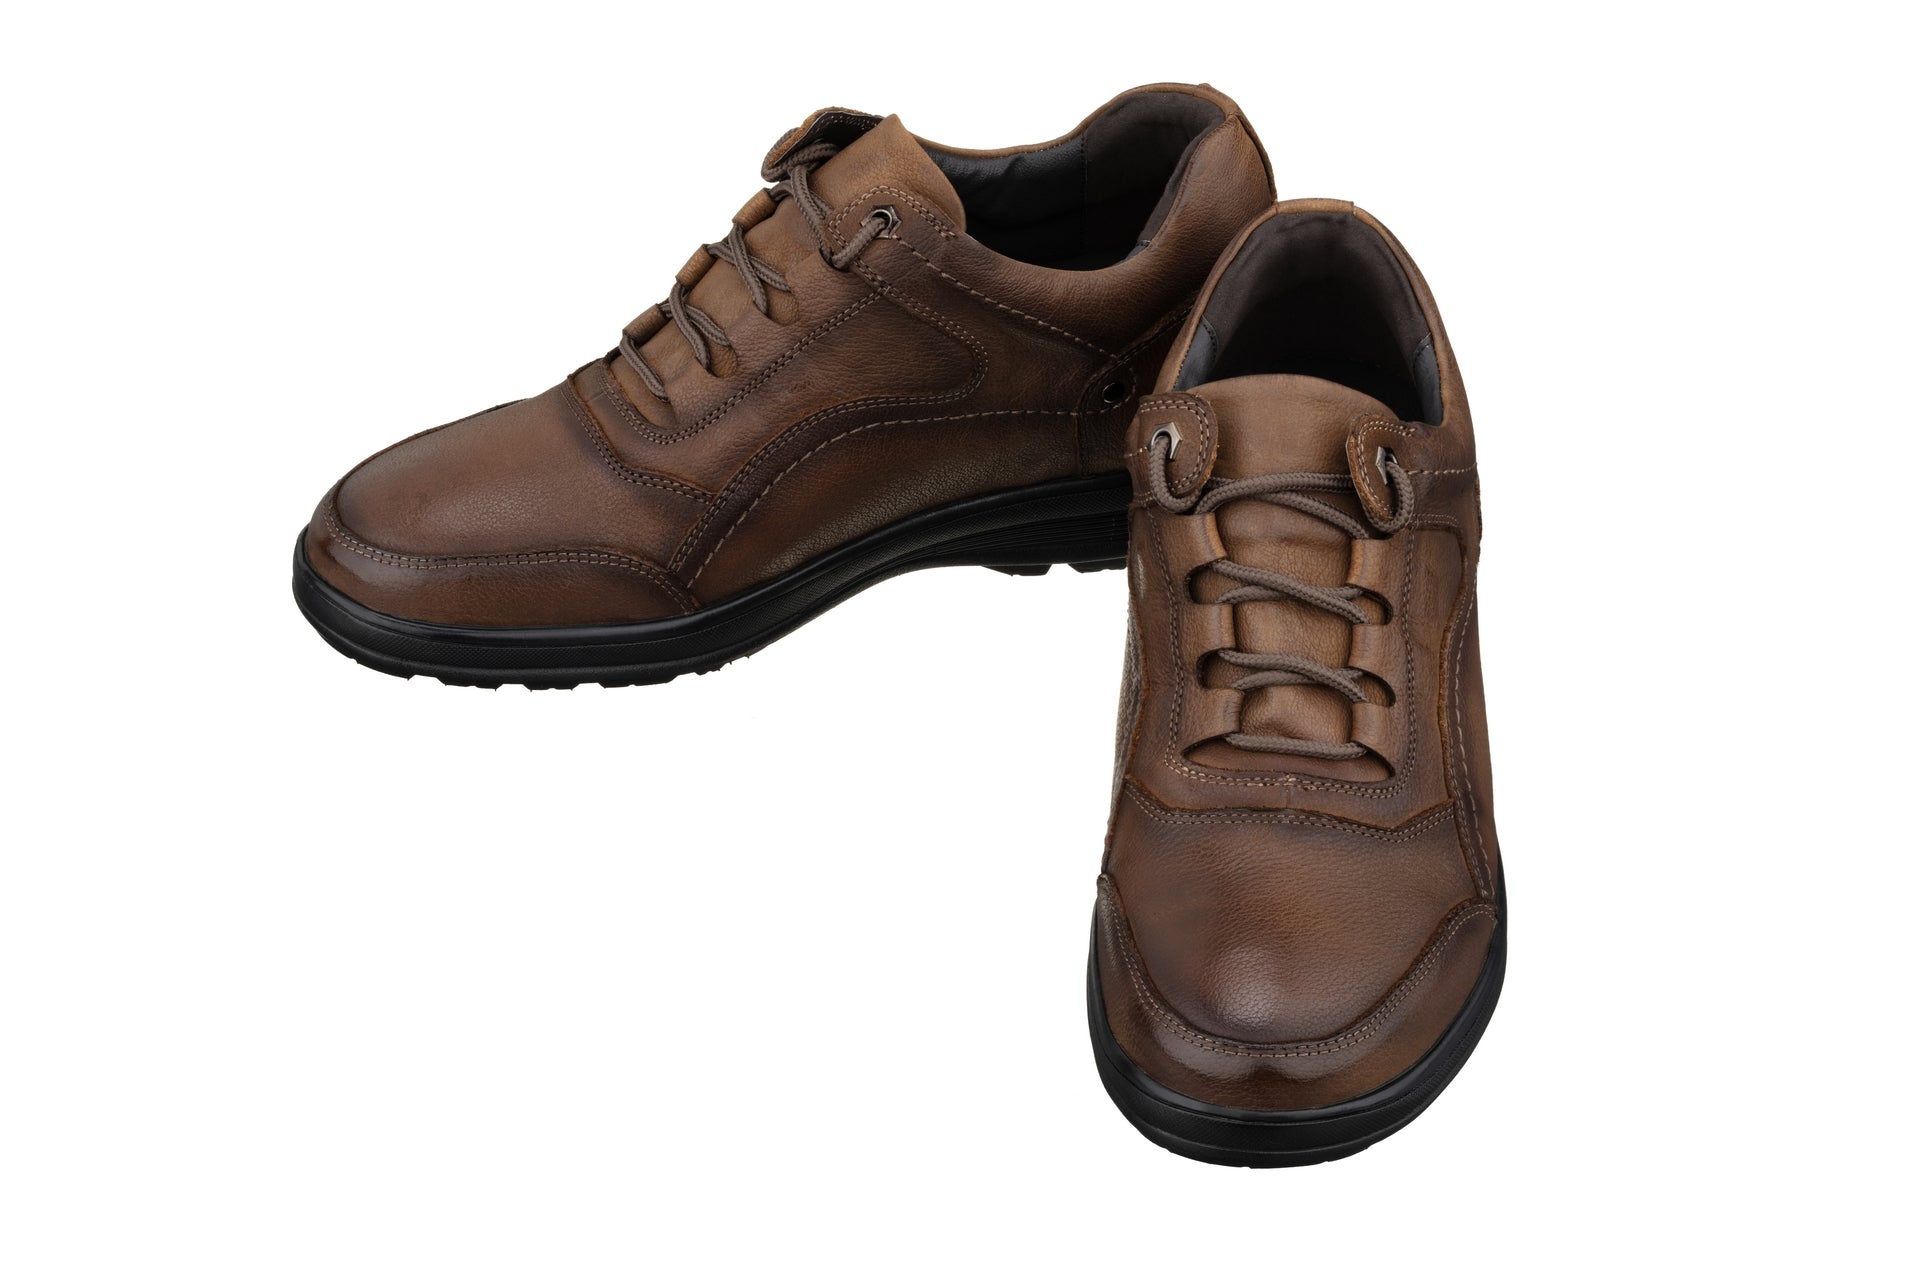 Elevator shoes height increase CALTO - K3044 - 2.8 Inches Taller (Brown) - Lace Up Casual Walker - Lightweight